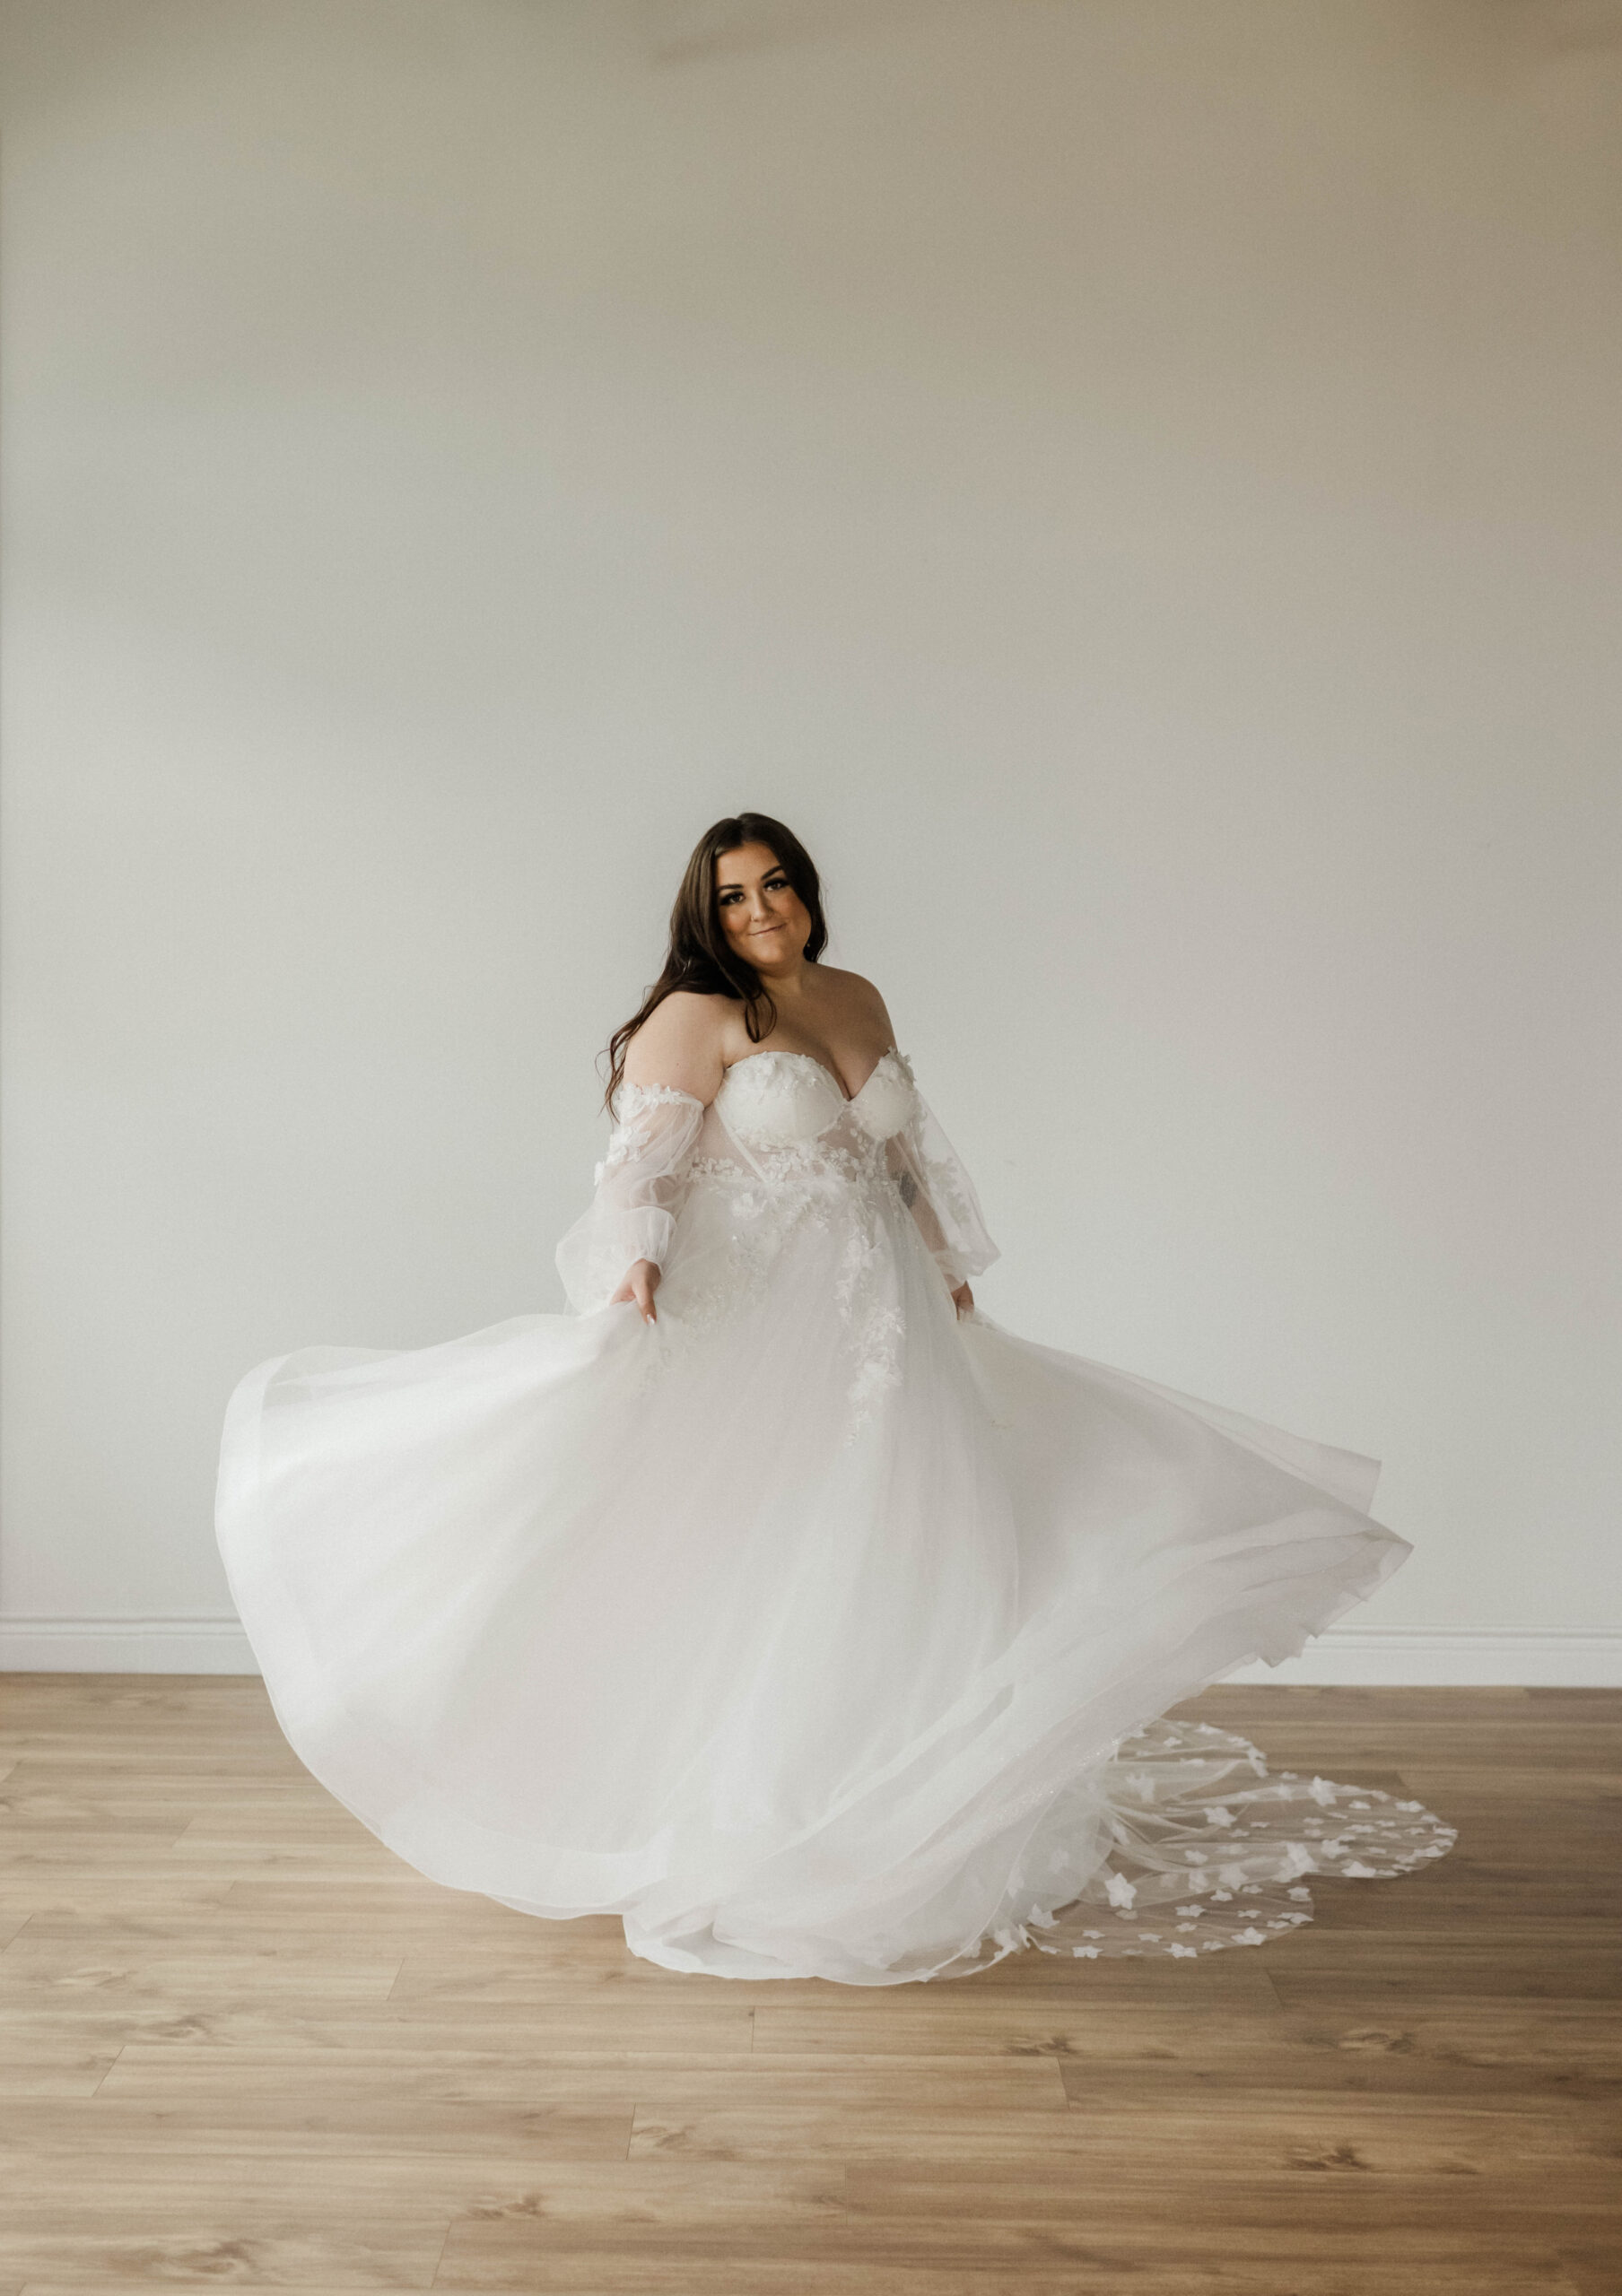 Harper's Bridal Session at Studio 717 in Bryan, TX with Rachel Driskell Photography